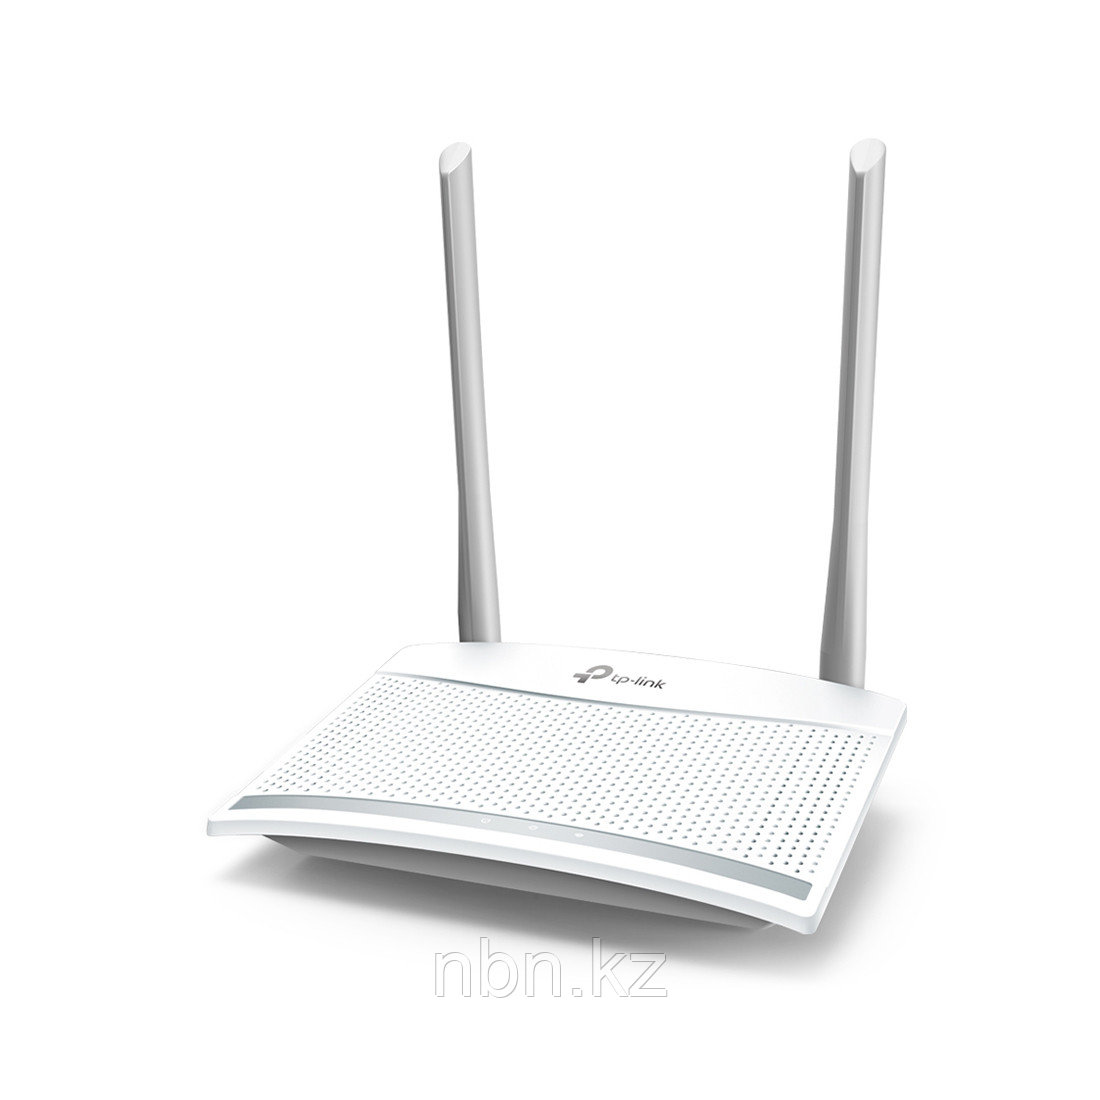 Маршрутизатор TP-Link TL-WR820N